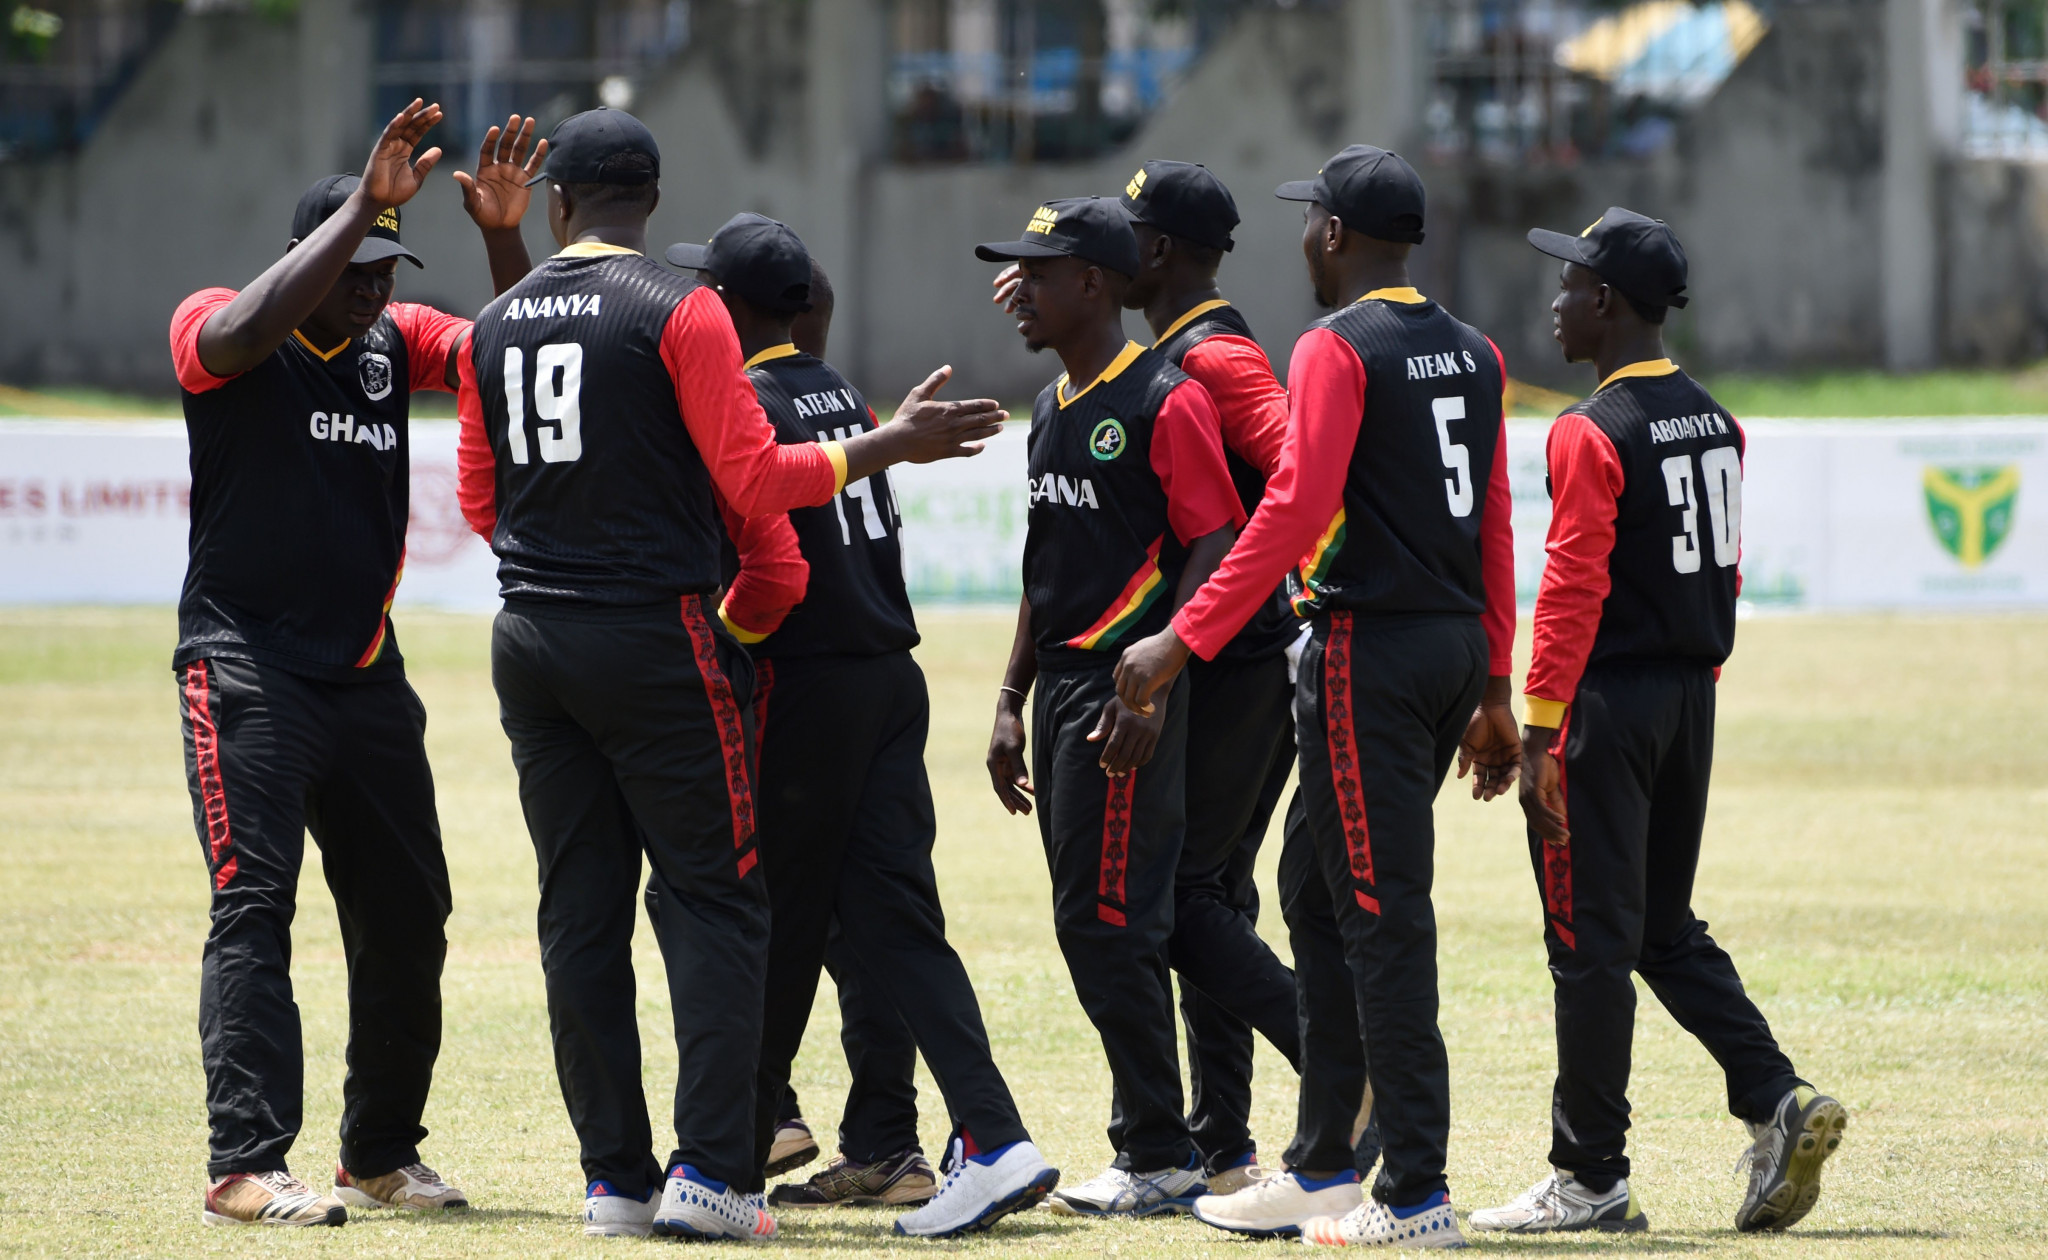 Australian politician says Ghana has bright future in cricket before African Games debut